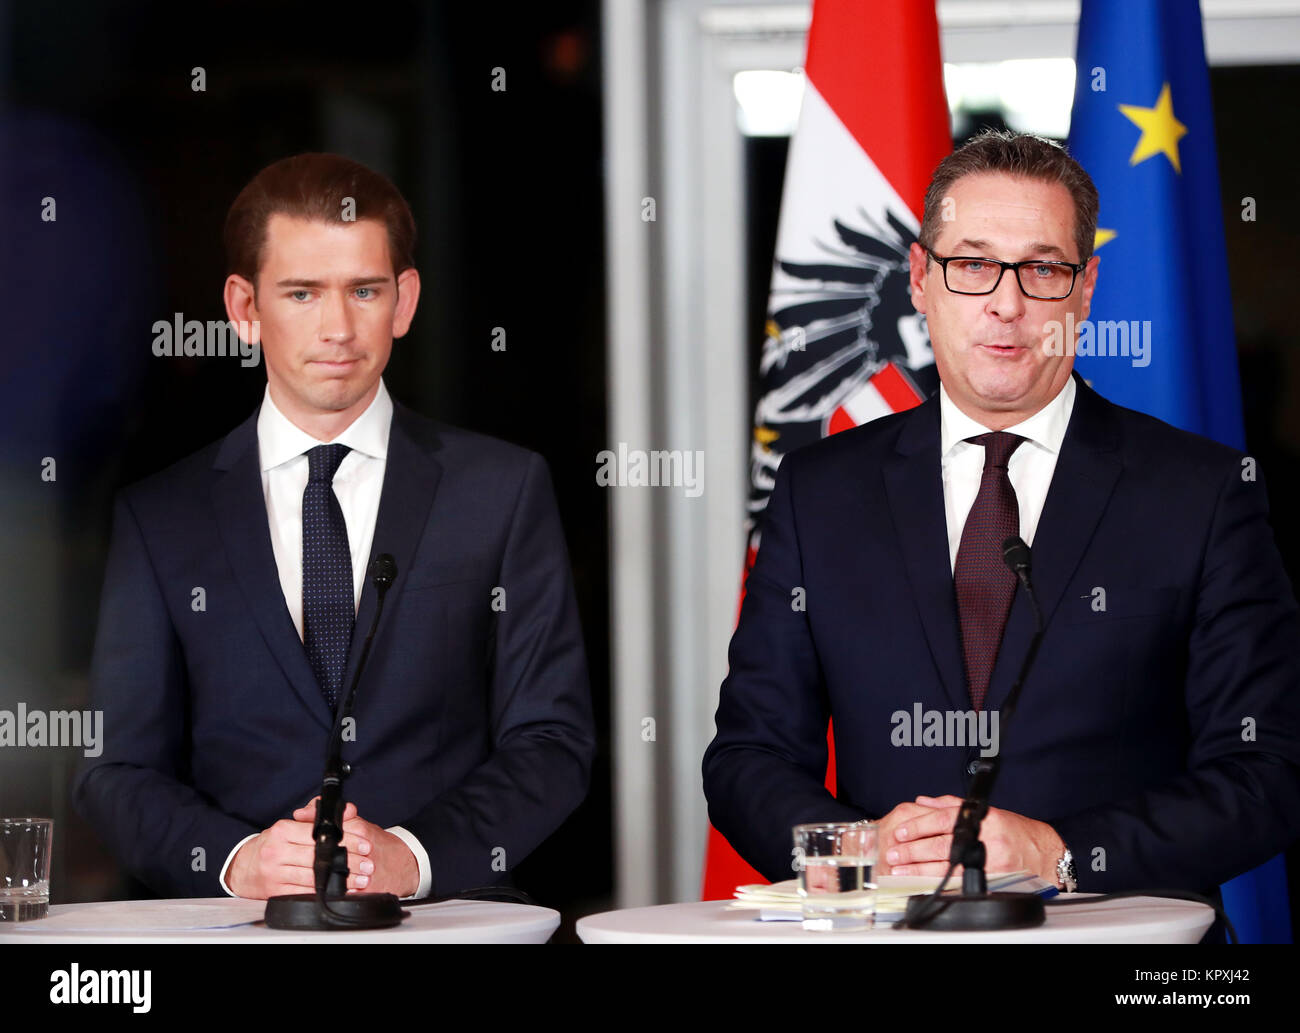 Vienna, Austria. 16th Dec, 2017. Sebastian Kurz (L) of the People's Party and Heinz-Christian Strache of the Freedom Party, who will serve as Austria's chancellor and vice-chancellor respectively, address the media at a joint press conference in Kahlenberg in Vienna, Austria, Dec. 16, 2017. The leaders of the two parties that will form Austria's next coalition government have presented the program for their upcoming five-year term in office to the media on Saturday. Credit: Pan Xu/Xinhua/Alamy Live News Stock Photo